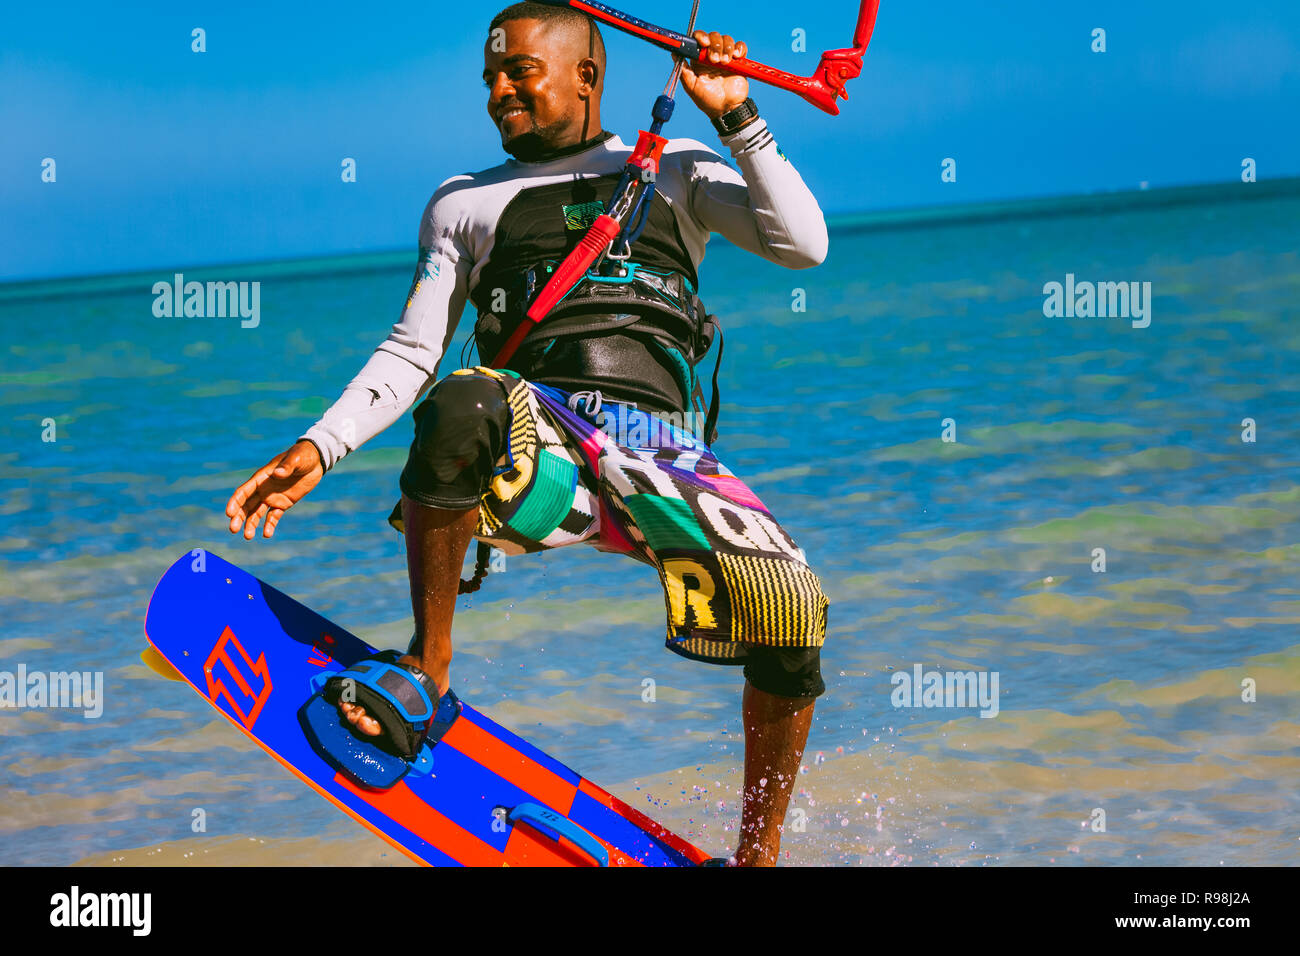 Egypt, Hurghada - 30 November, 2017: Close-up smiling kitesurfer soaring over the Red sea surface. The sportsman on the wakeboard holding the kite str Stock Photo